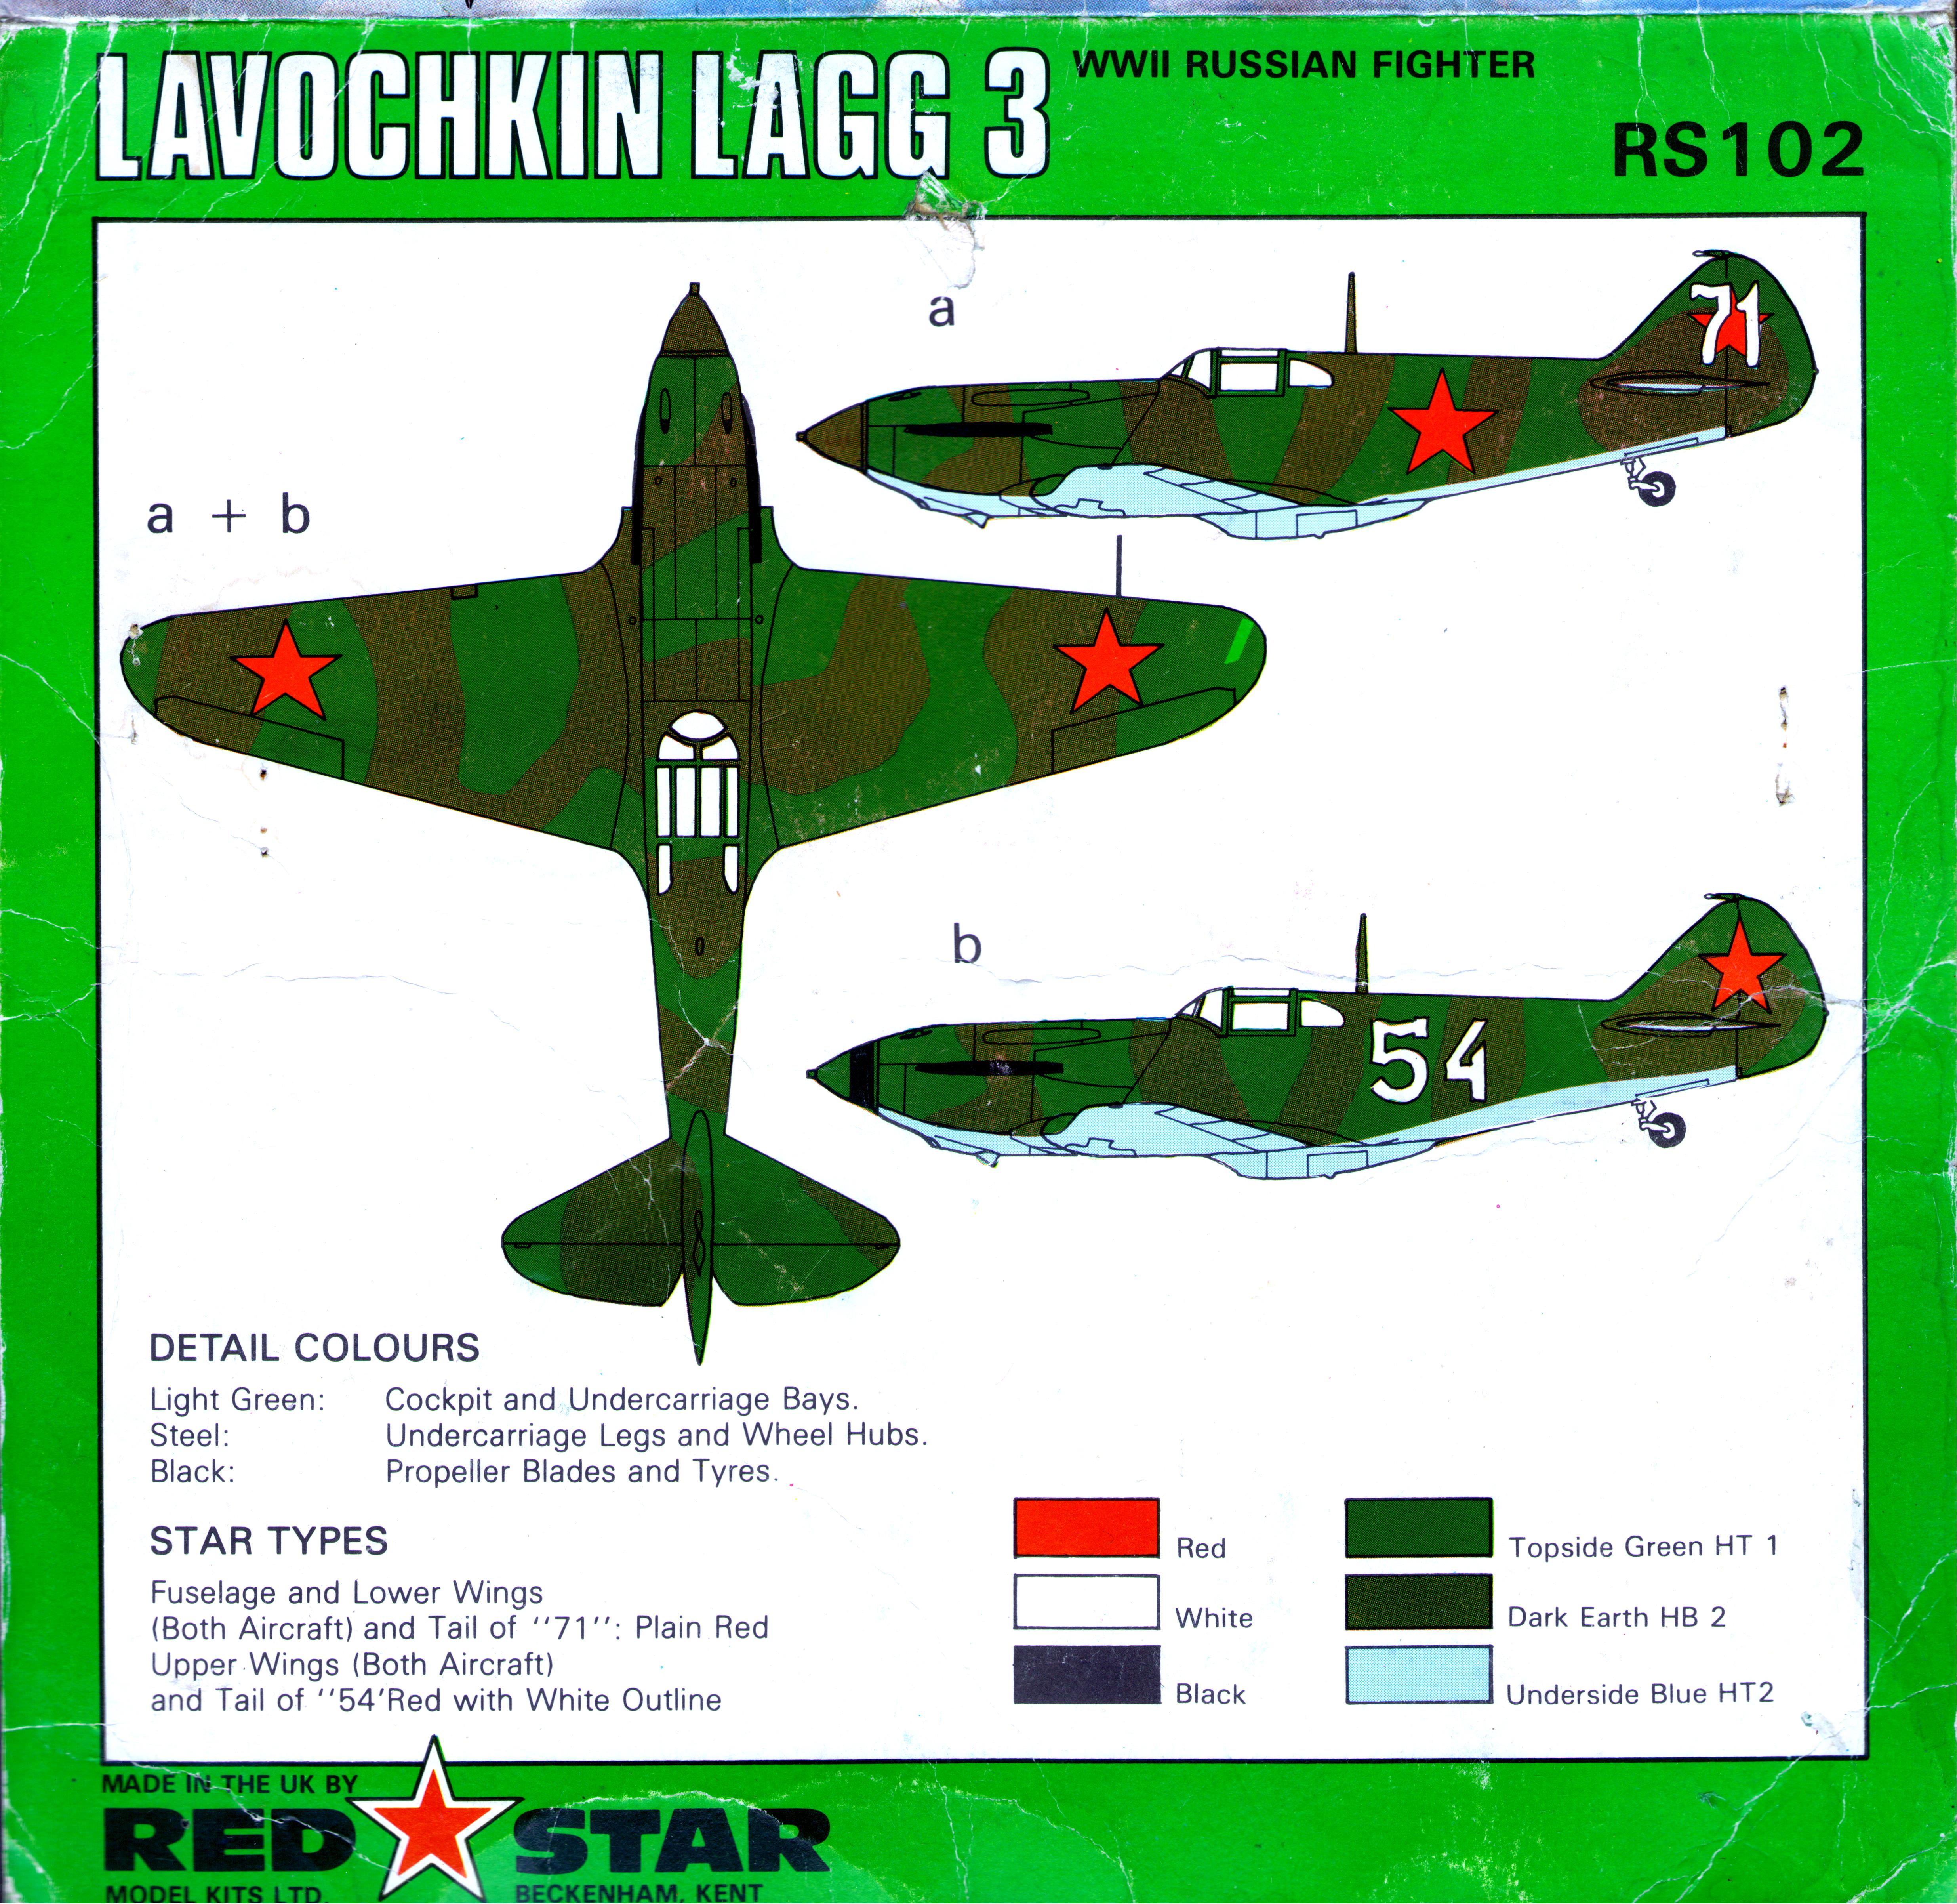 Red Star RS102 Lavochkin LaGG-3, Red Star Model Kits Ltd, 1984 Colour painting guide